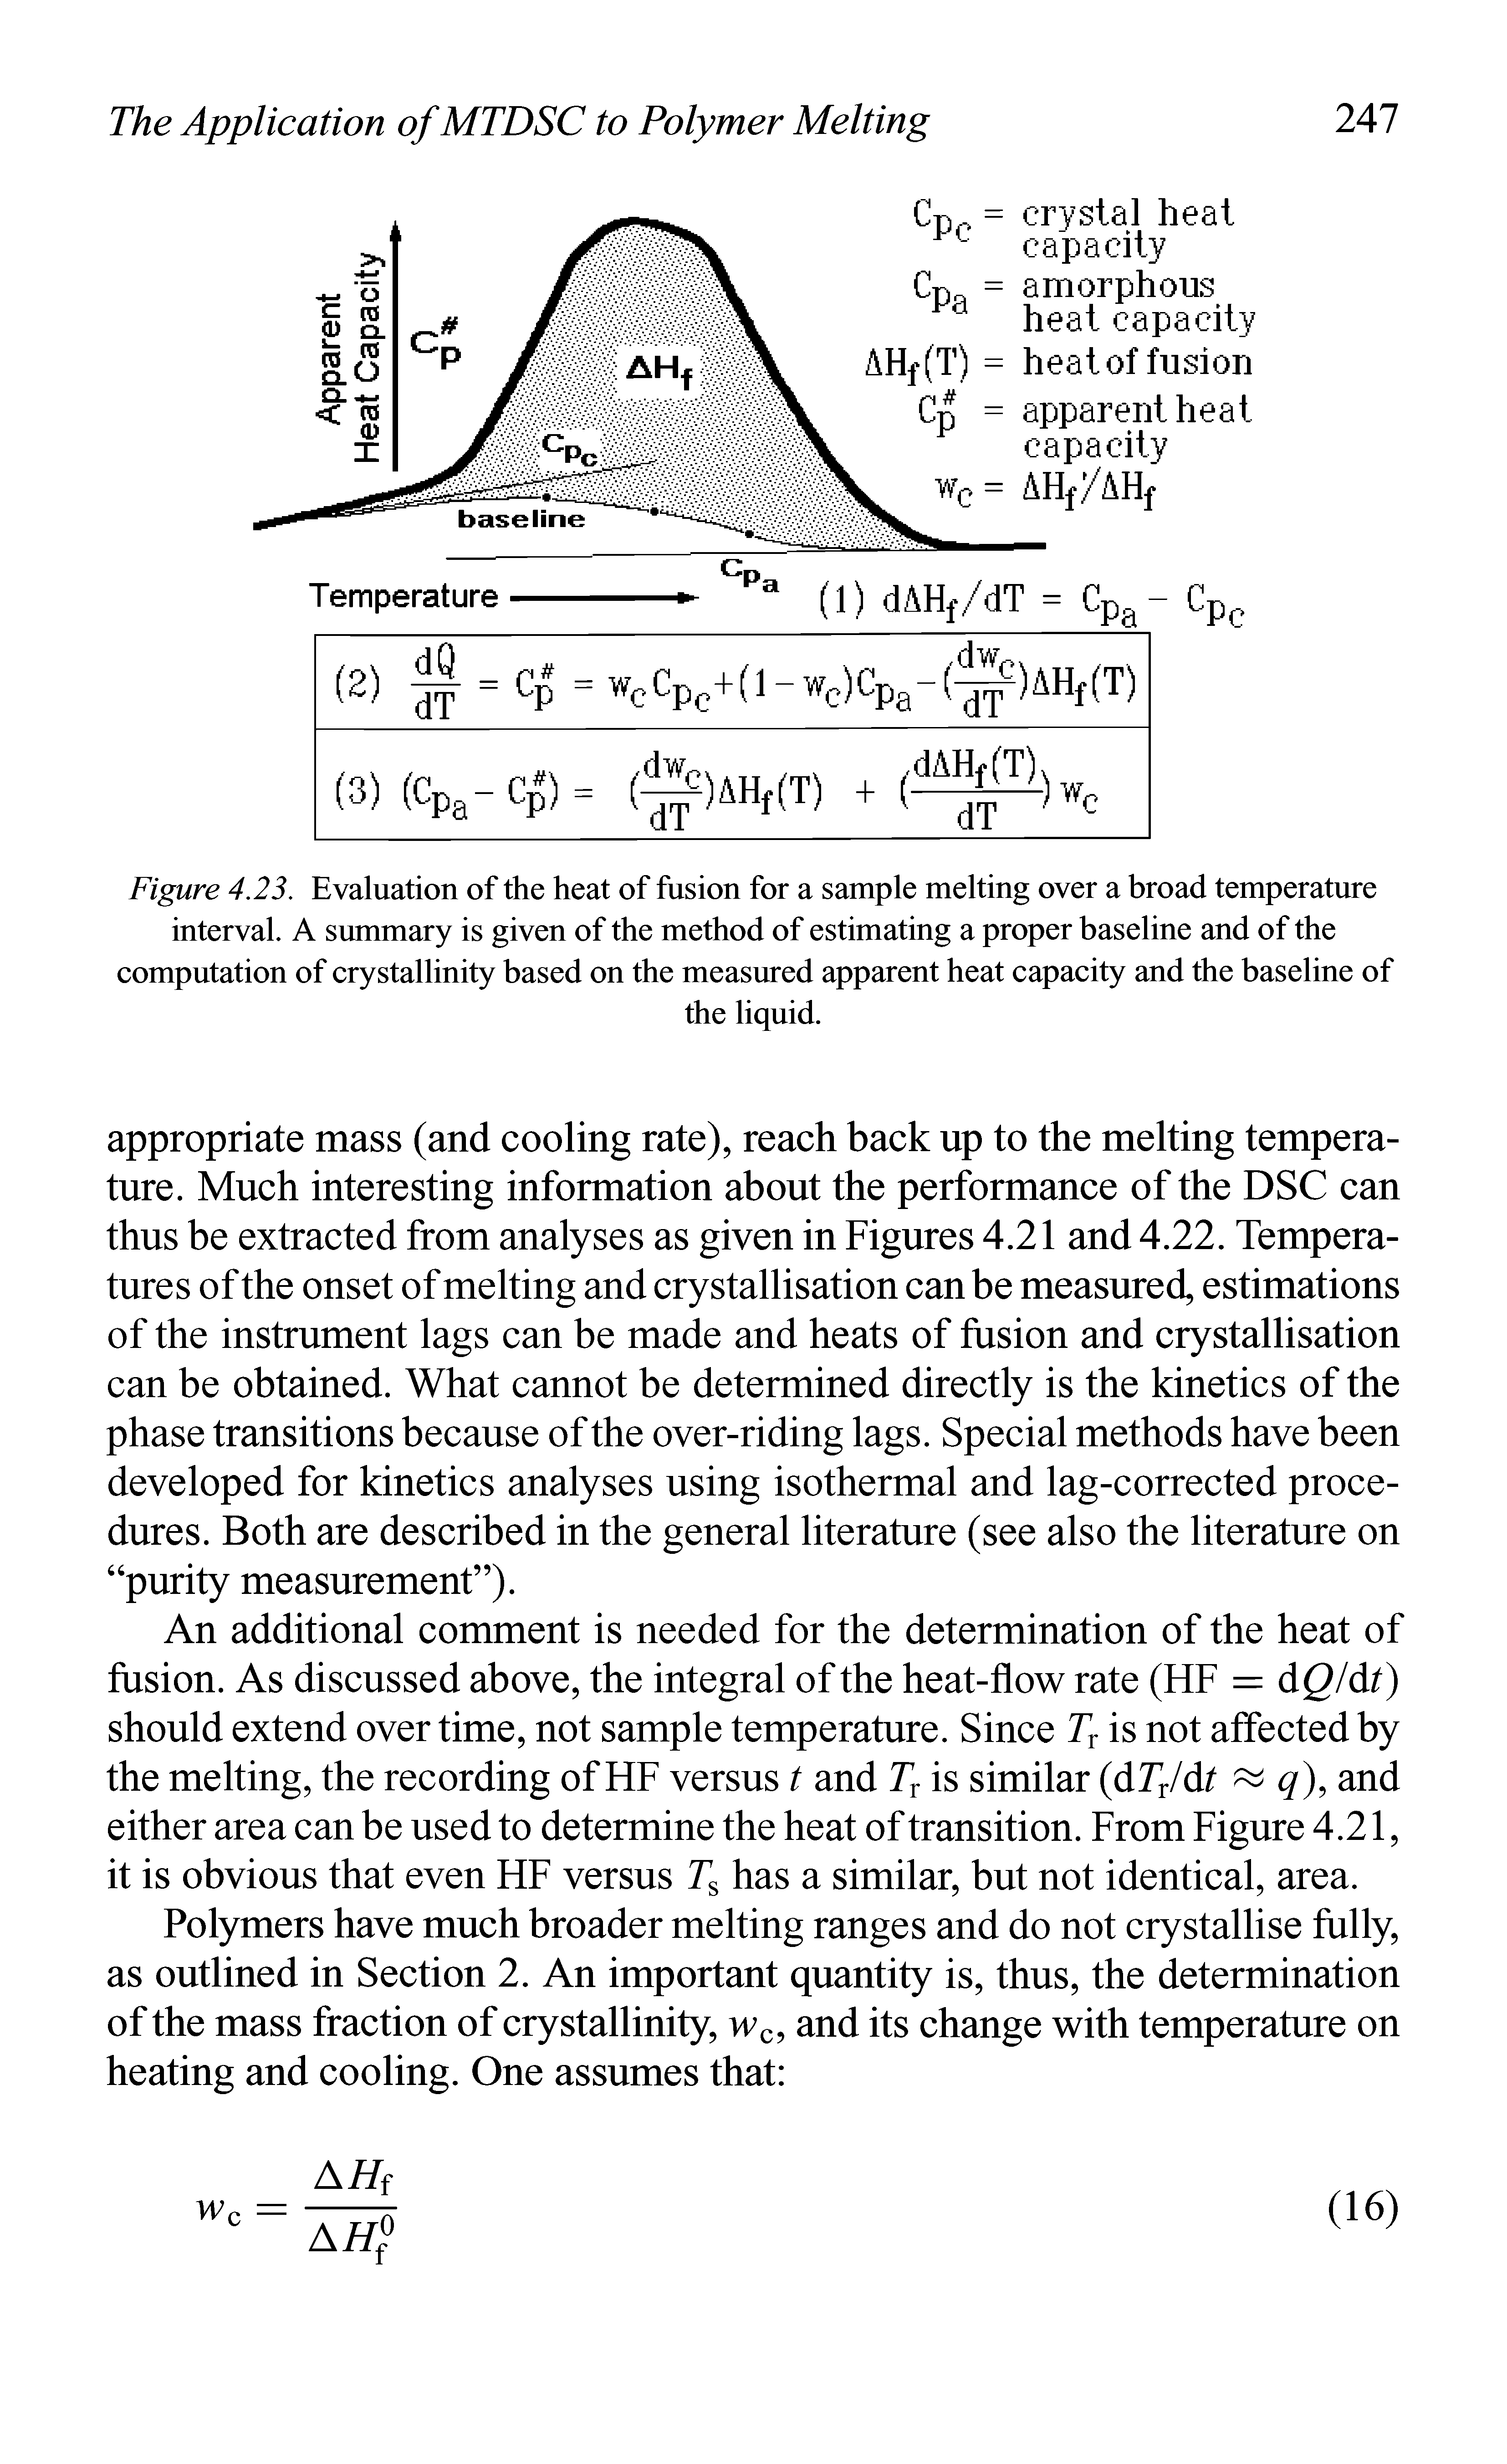 Figure 4.23. Evaluation of the heat of fusion for a sample melting over a broad temperature interval. A summary is given of the method of estimating a proper baseline and of the computation of crystallinity based on the measured apparent heat capacity and the baseline of...